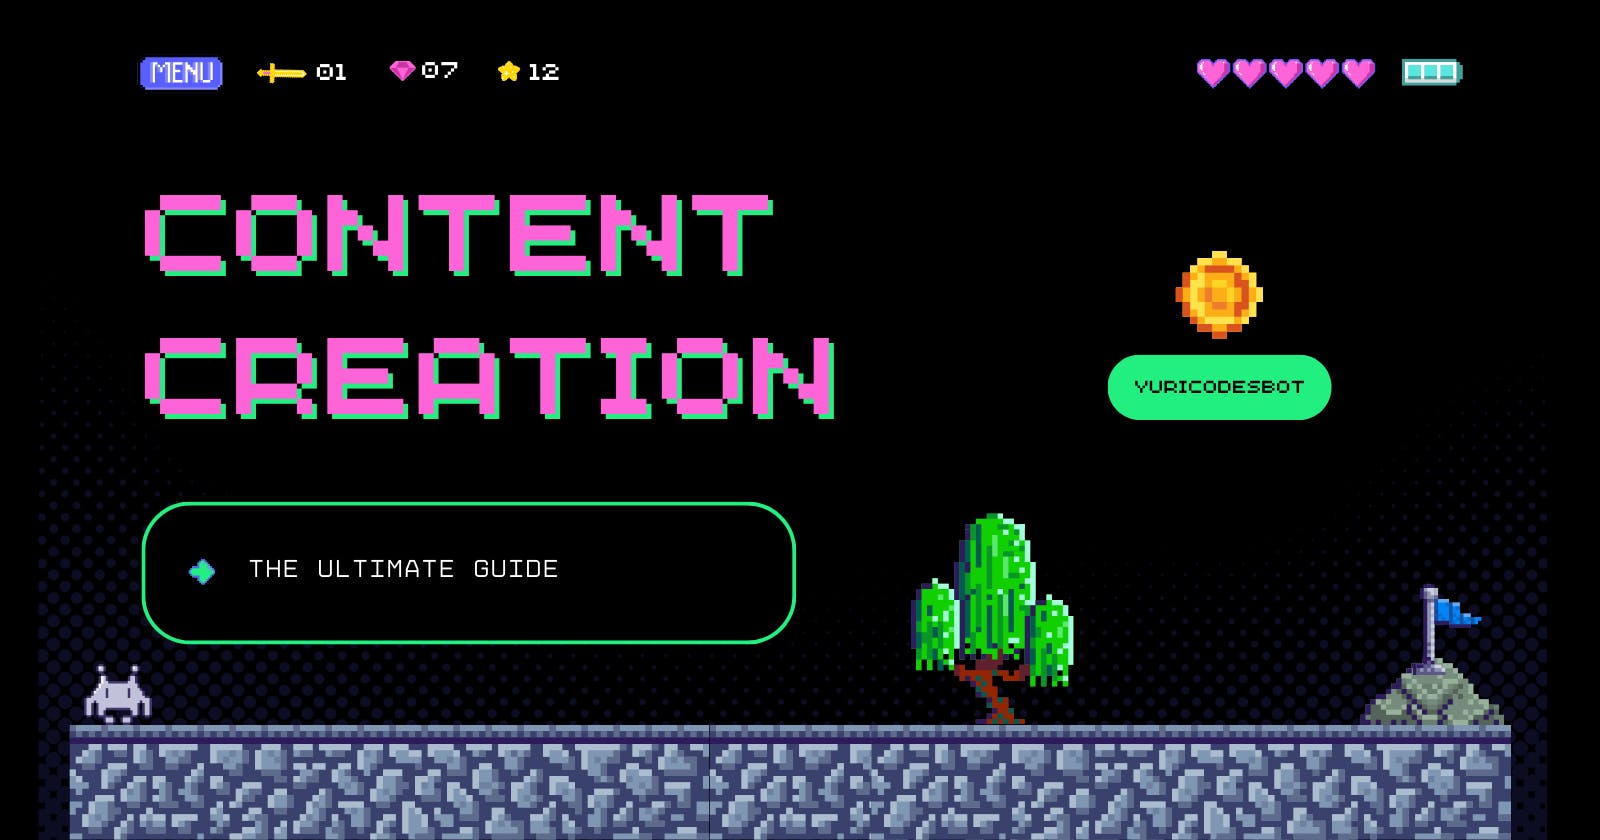 The ultimate guide to content creation